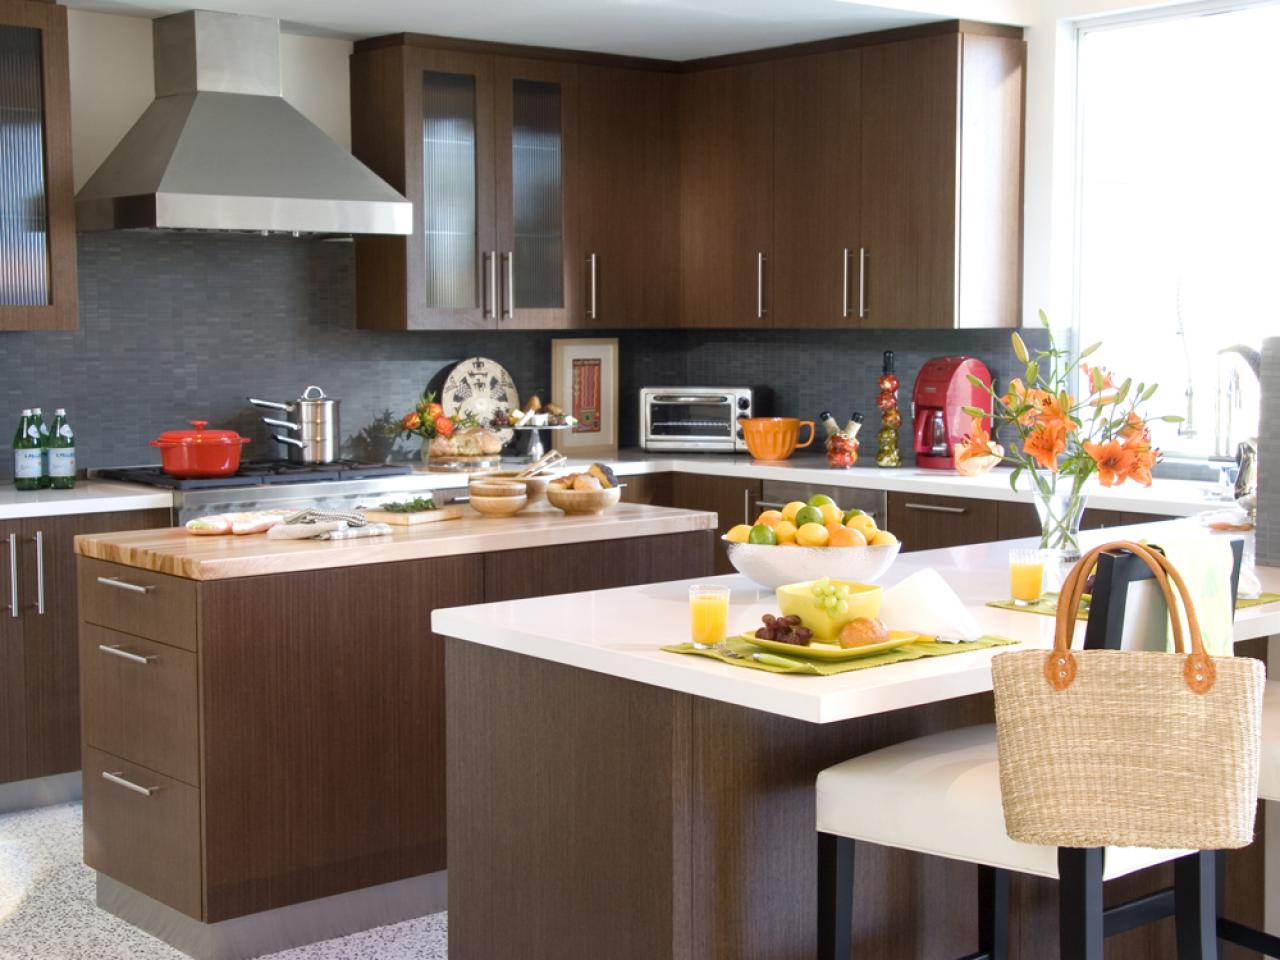 Cheap Kitchen Cabinets: Pictures, Options, Tips & Ideas  HGTV